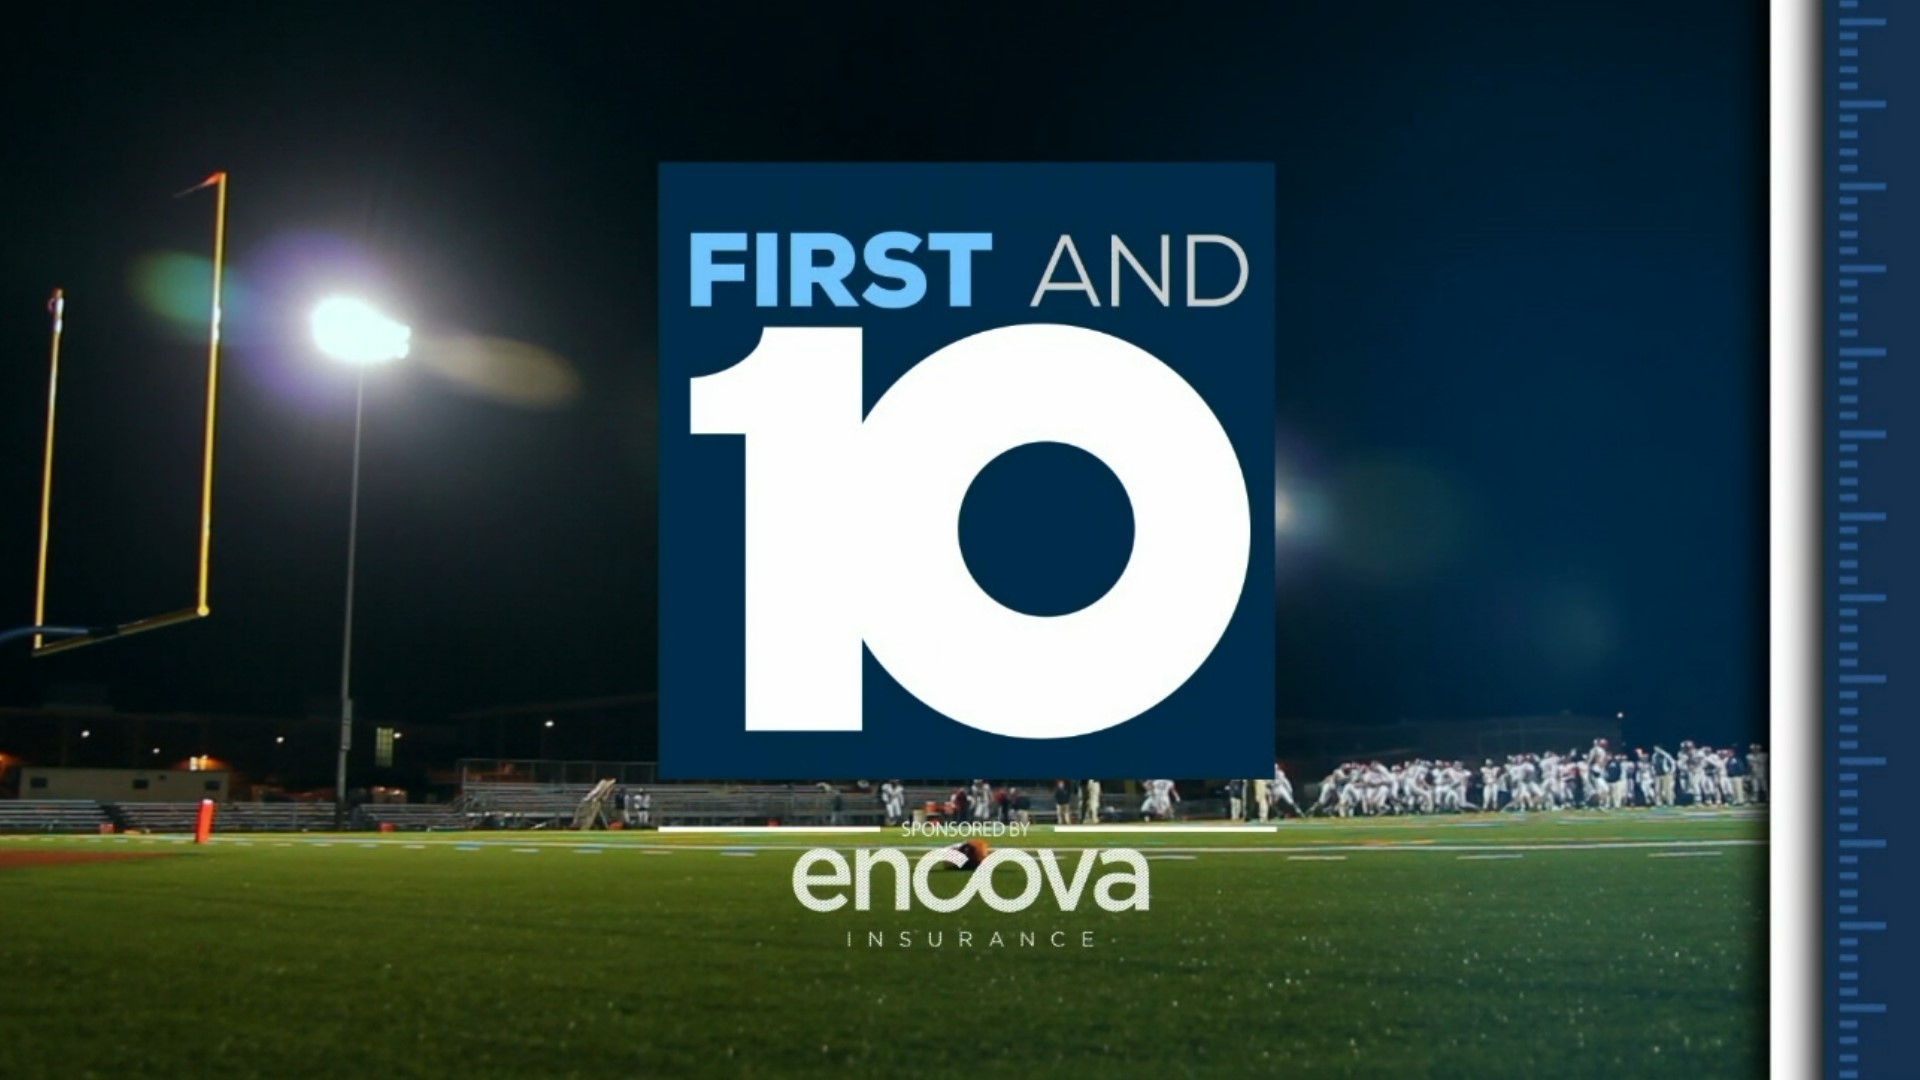 Watch complete coverage including highlights Fridays at 11:15 p.m. on First & 10.